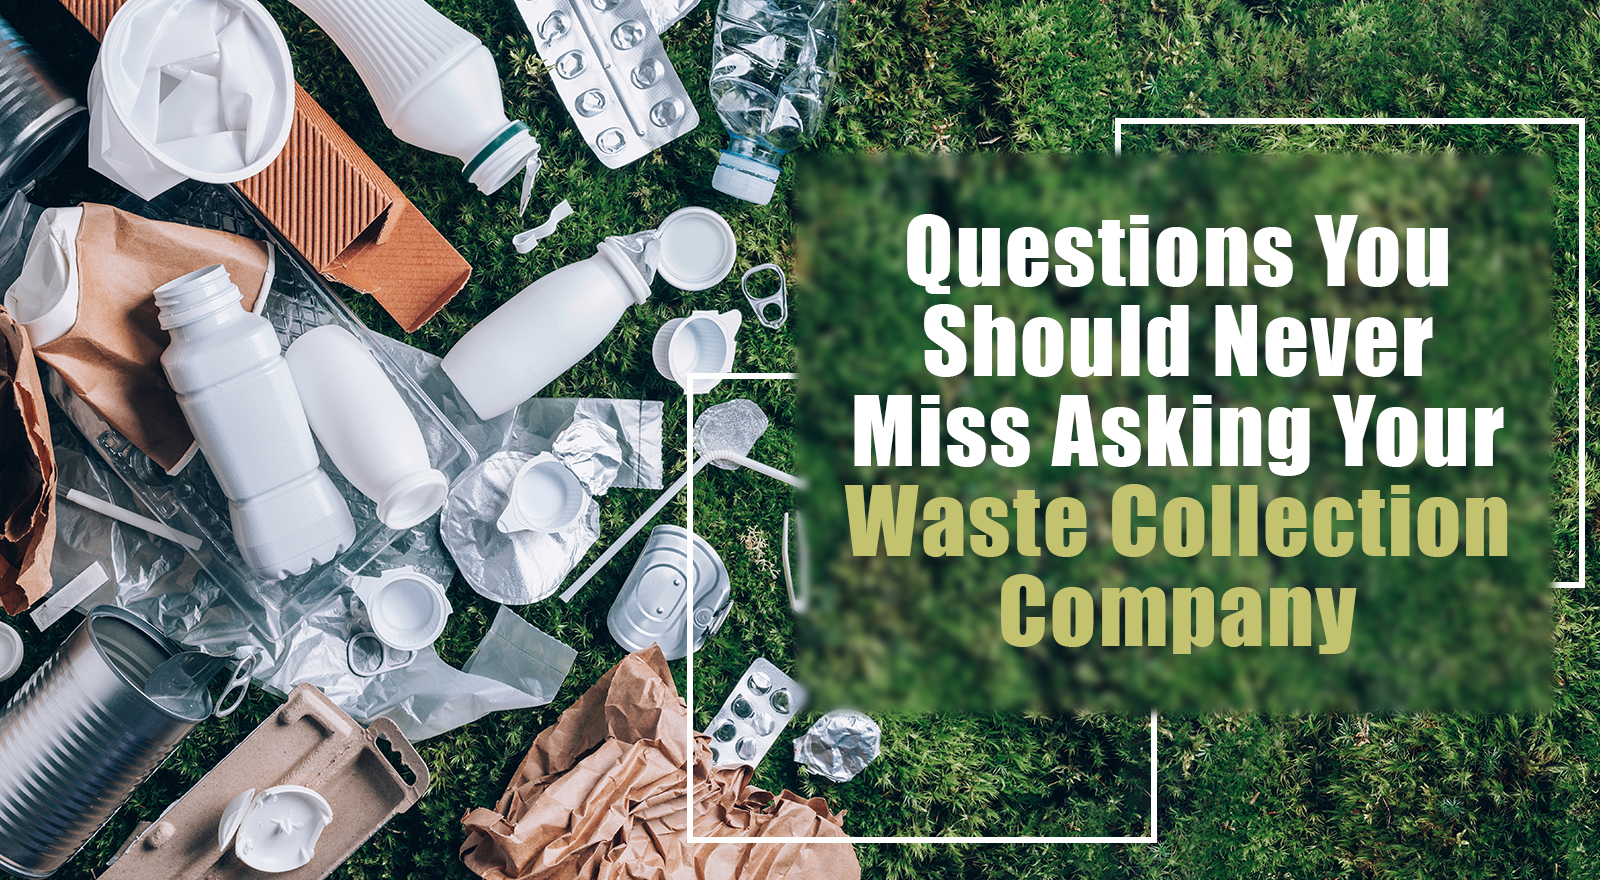 Questions You Should Never Miss Asking Your Waste Collection Company